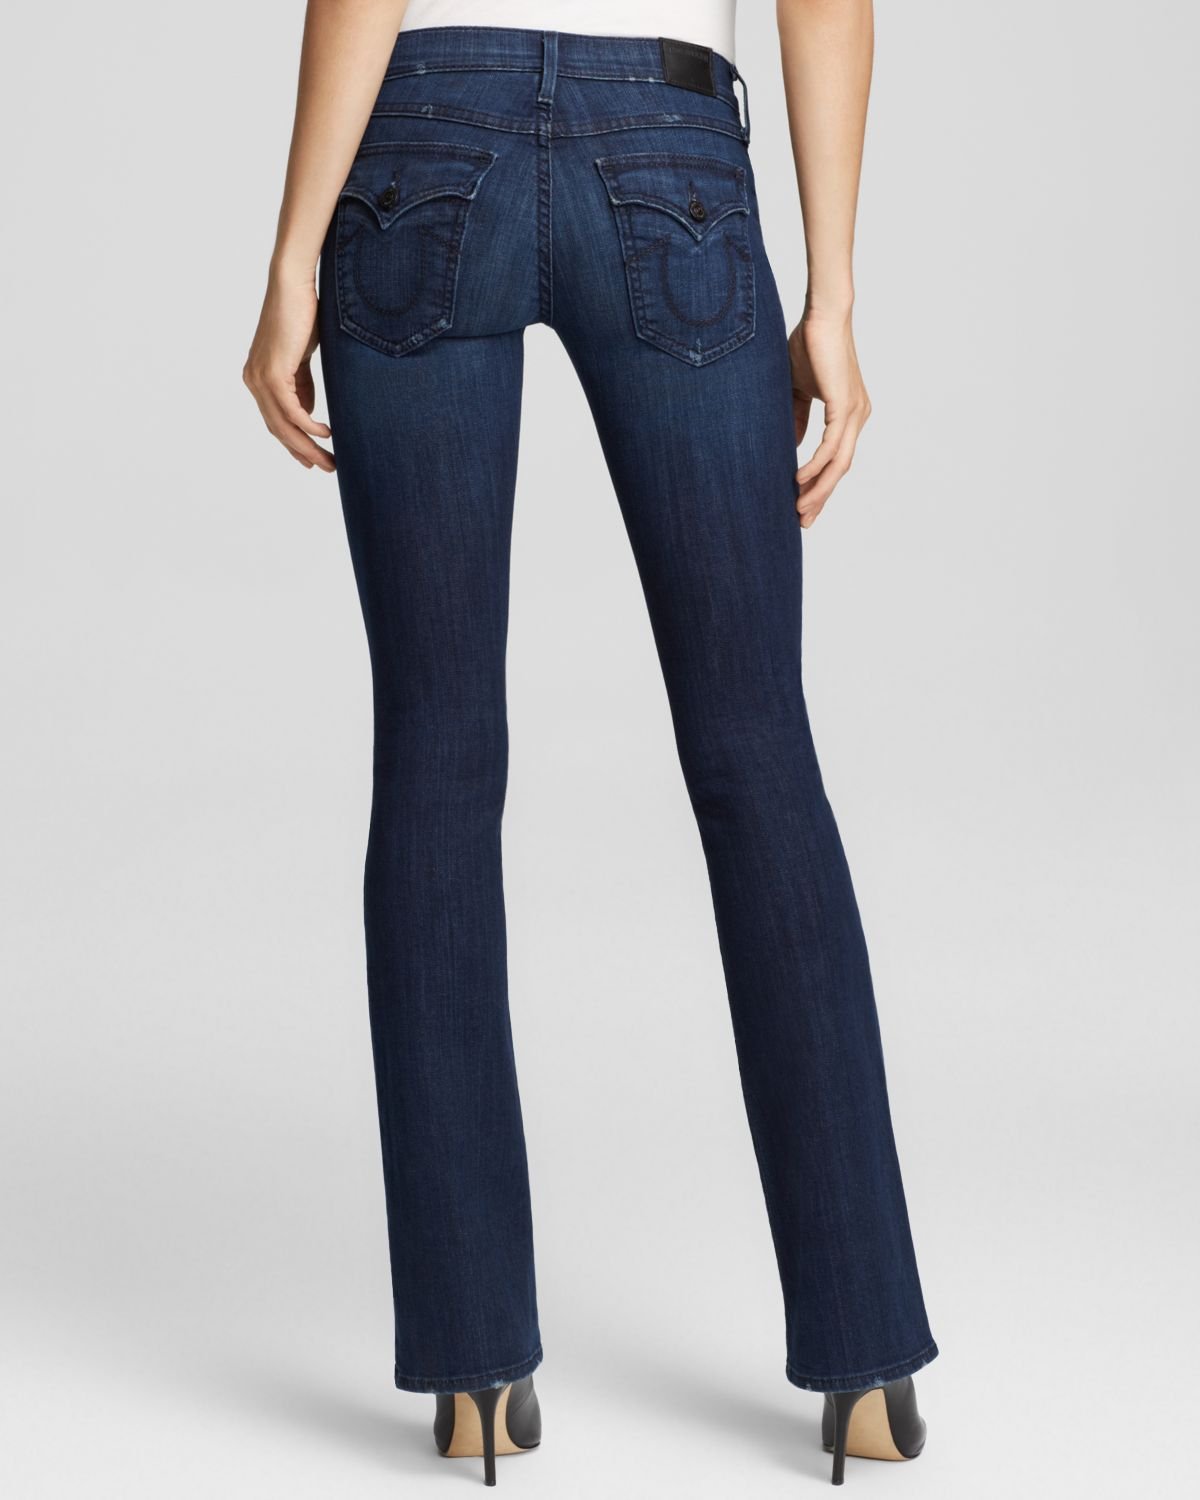 Lyst - True Religion Becca Bootcut Jeans In Faithful Message in Blue